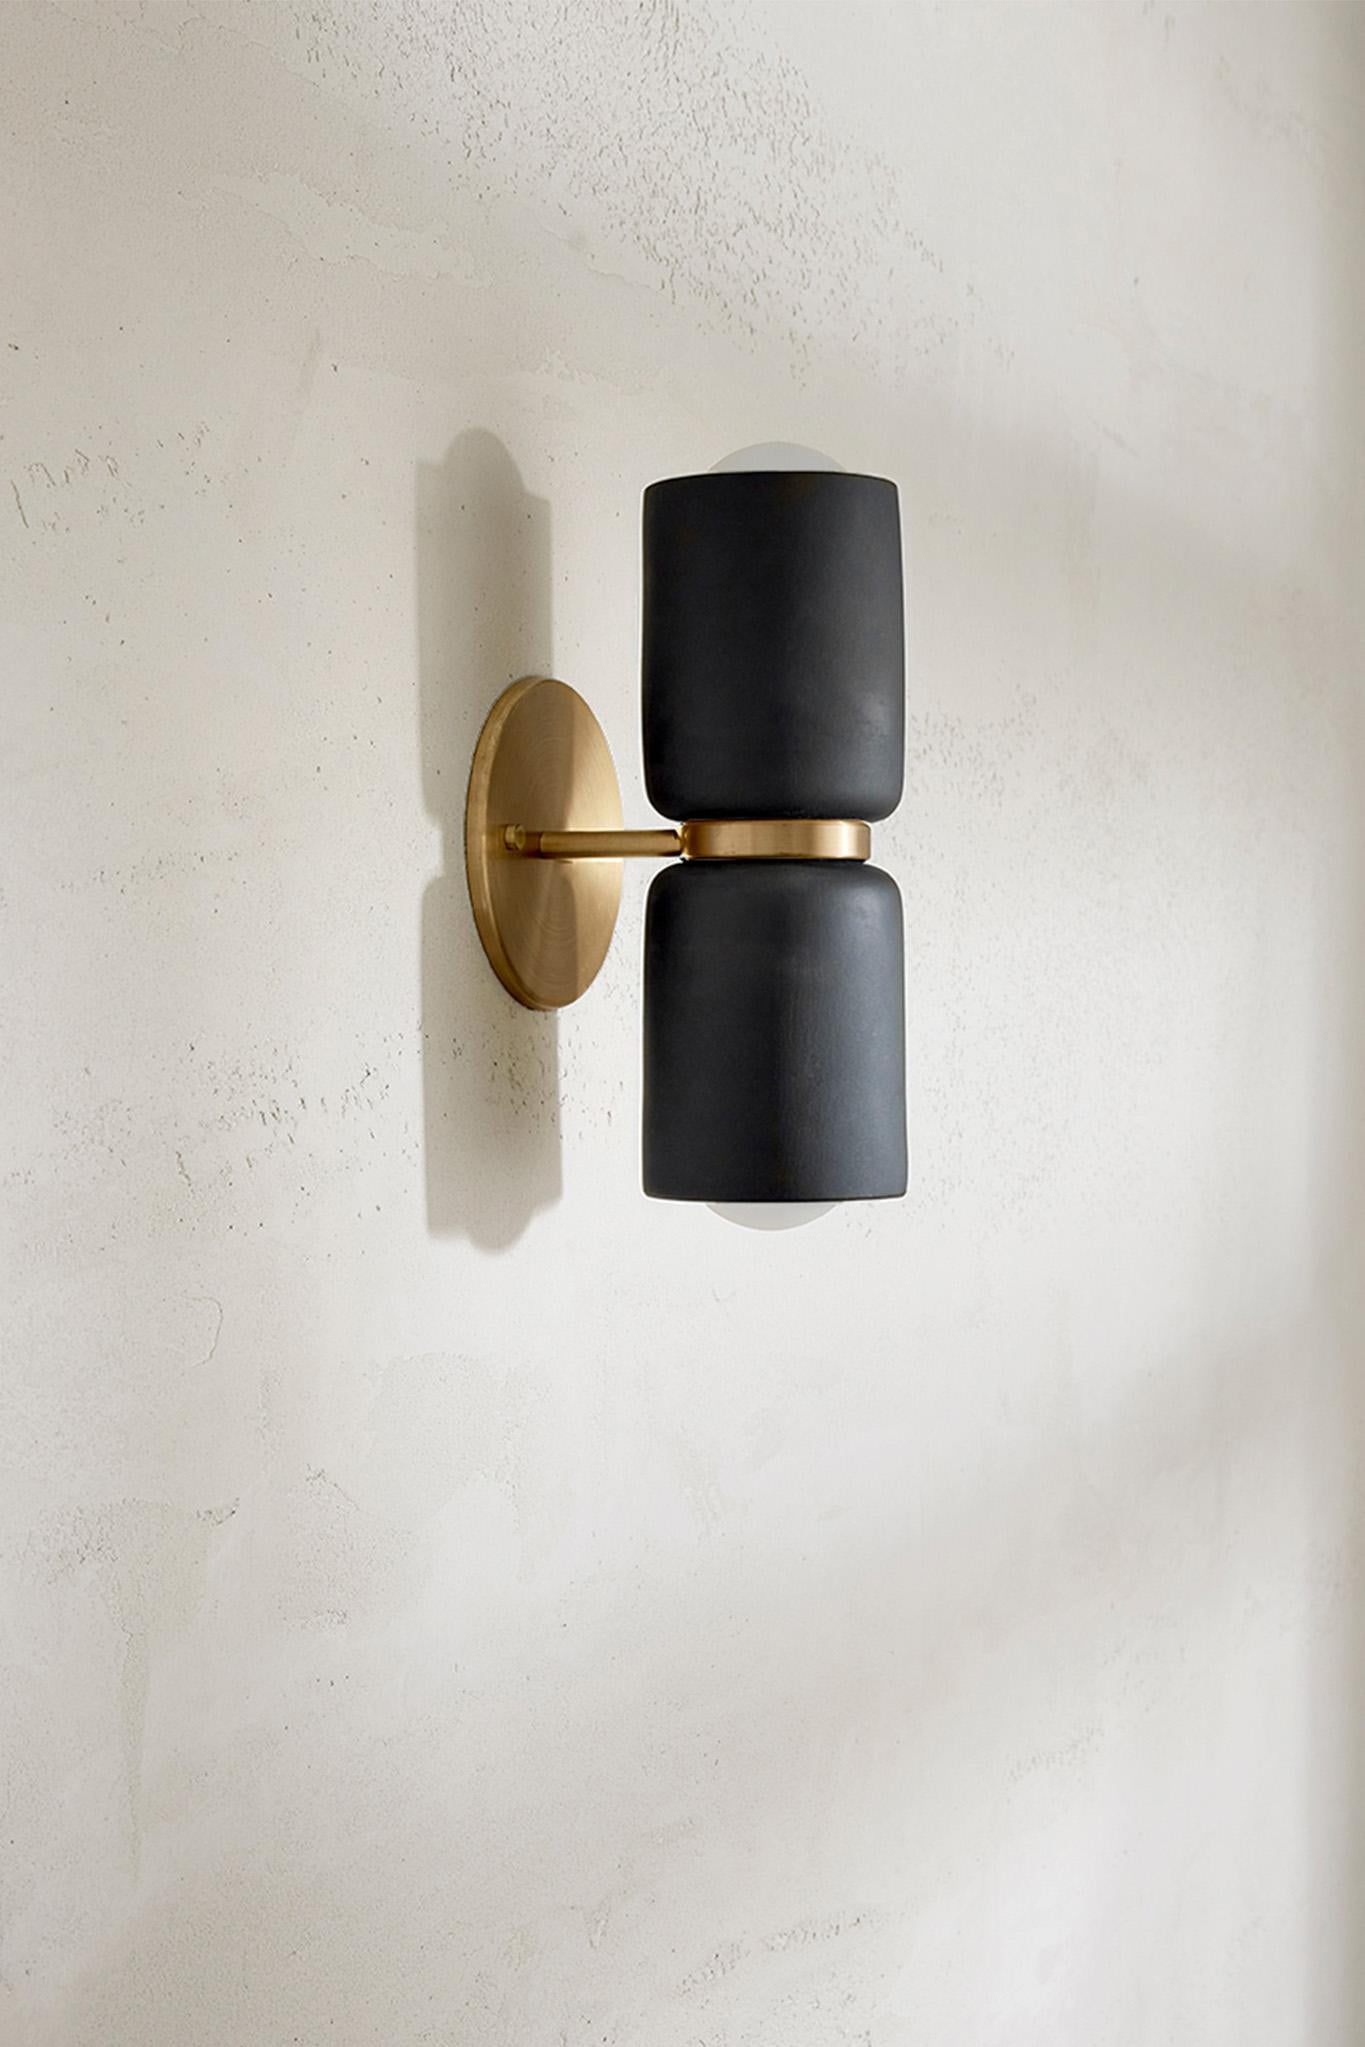 Terra 2 Wall Light In New Condition For Sale In BYRON BAY, NSW